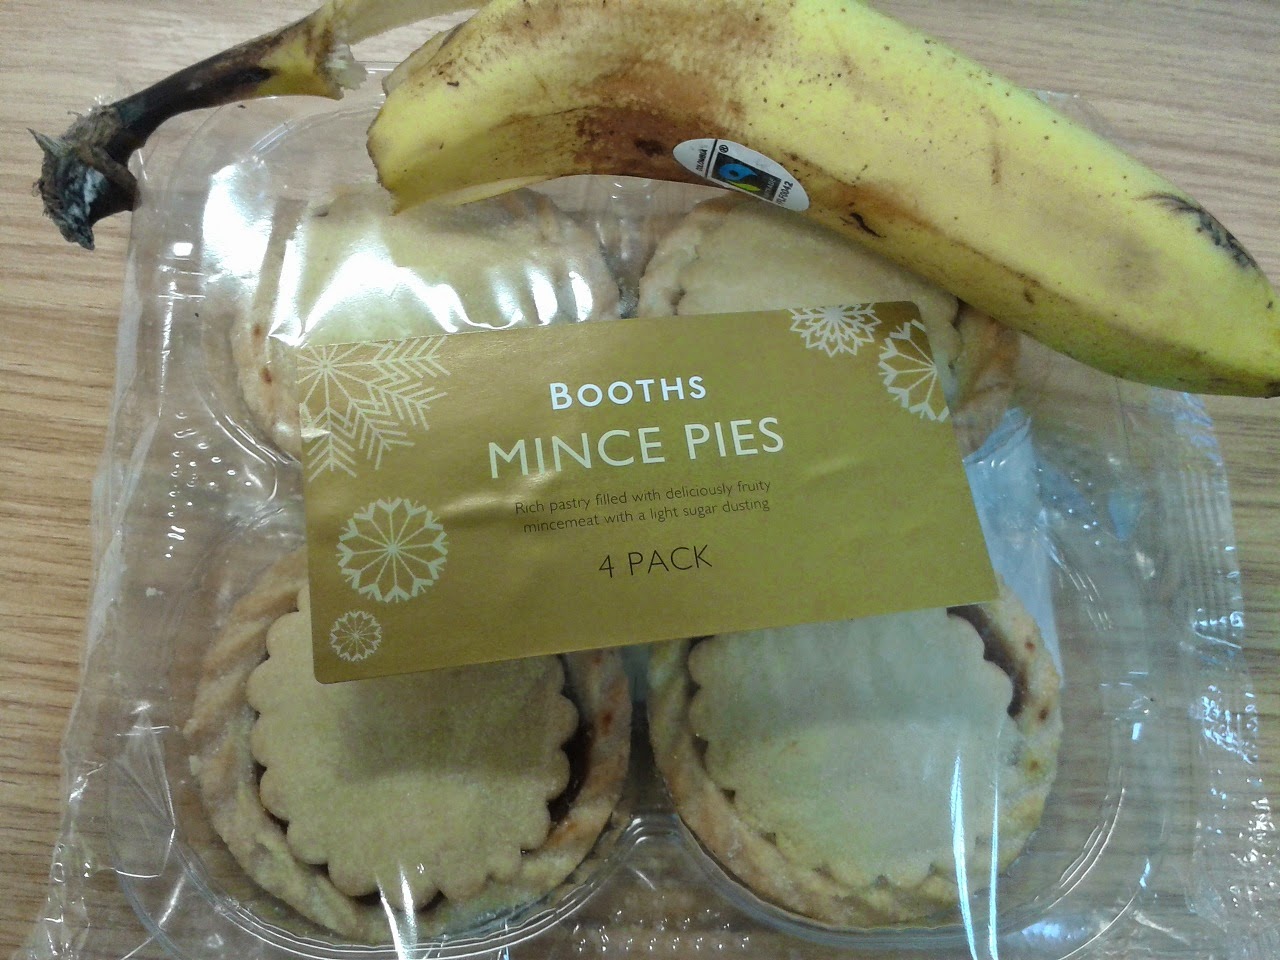 Booths Mince Pie Review